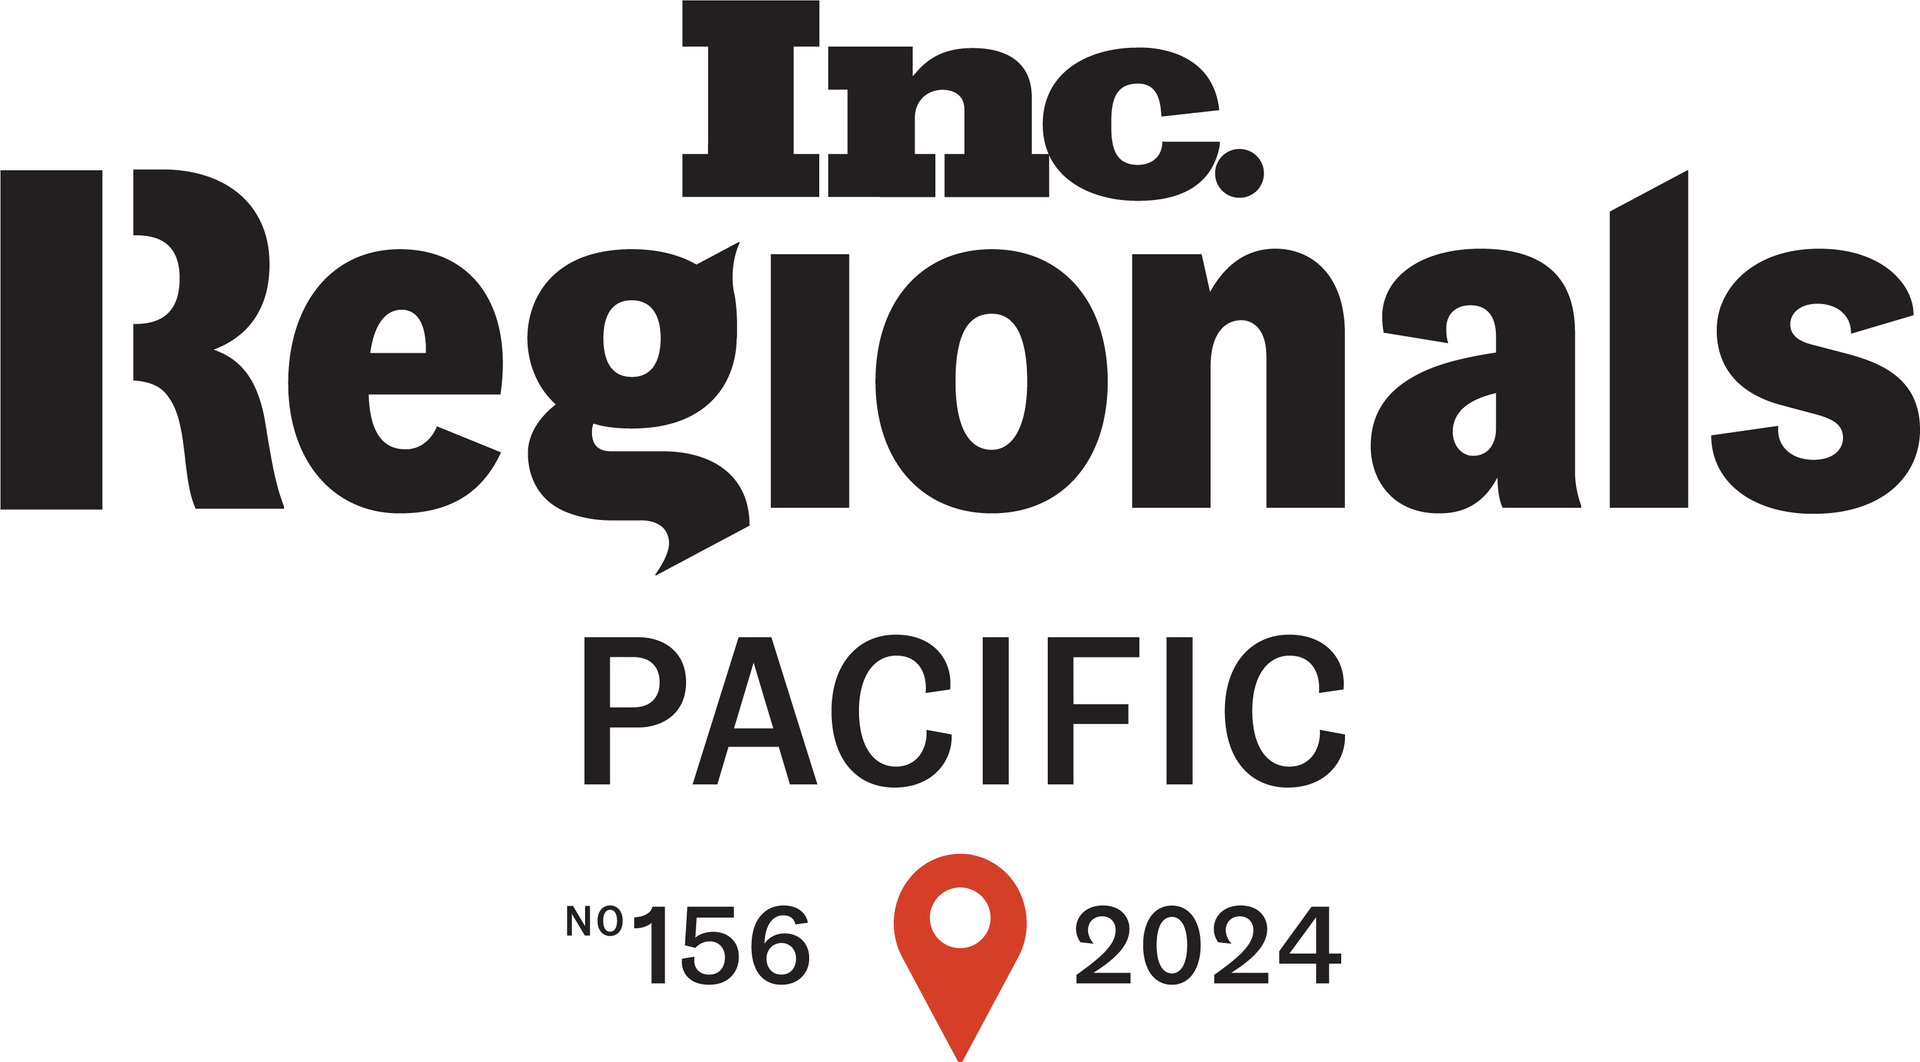 the logo for inc. regionals pacific is black and white with a red pin .